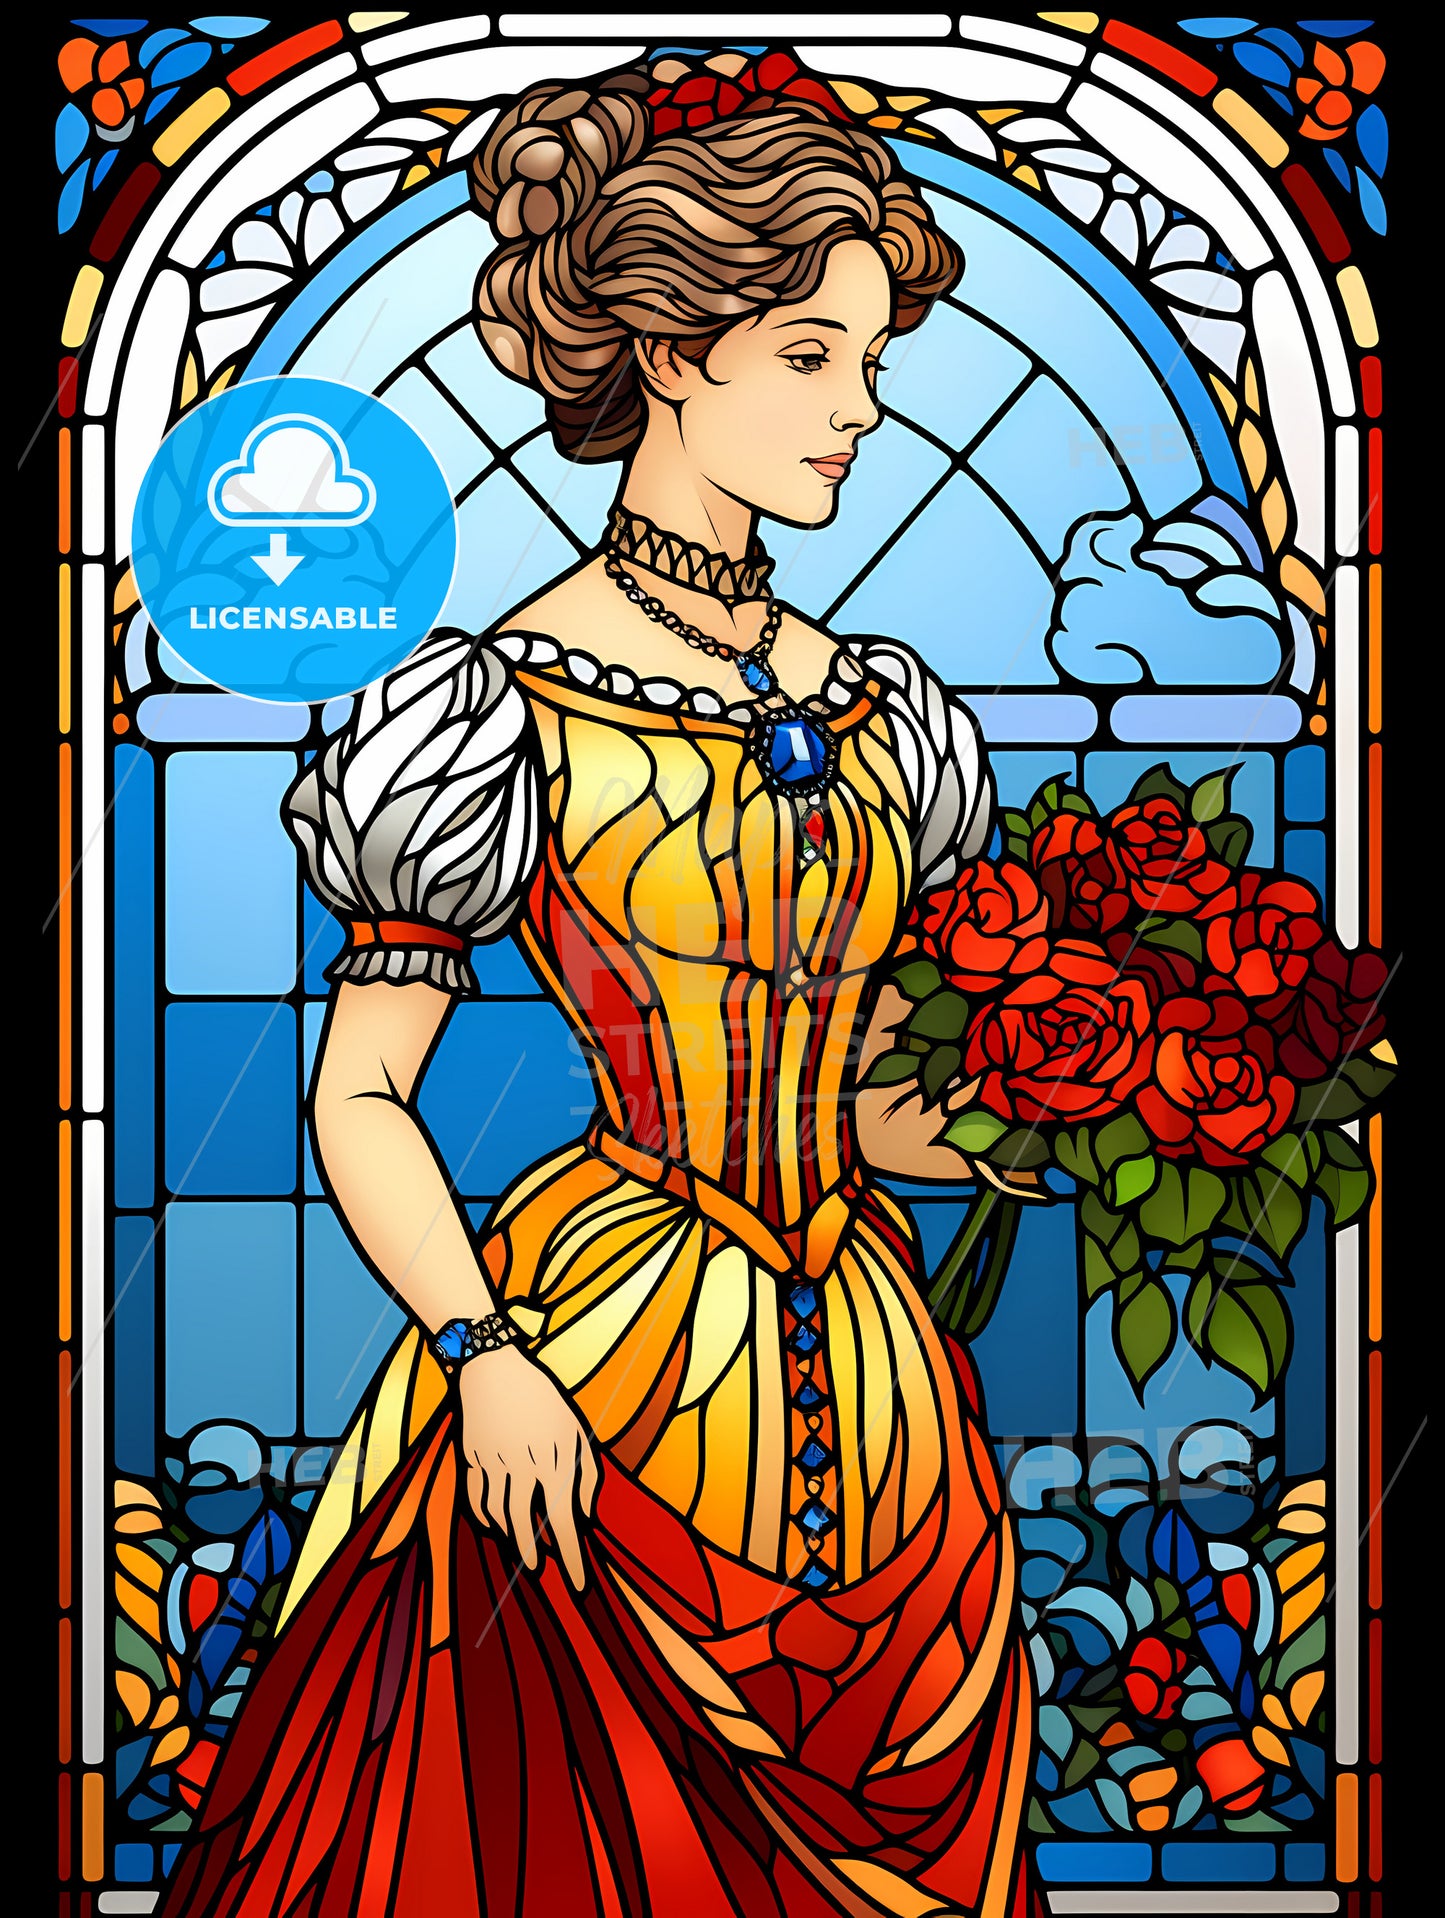 Elegant Victorian Woman, A Stained Glass Window With A Woman Holding Flowers